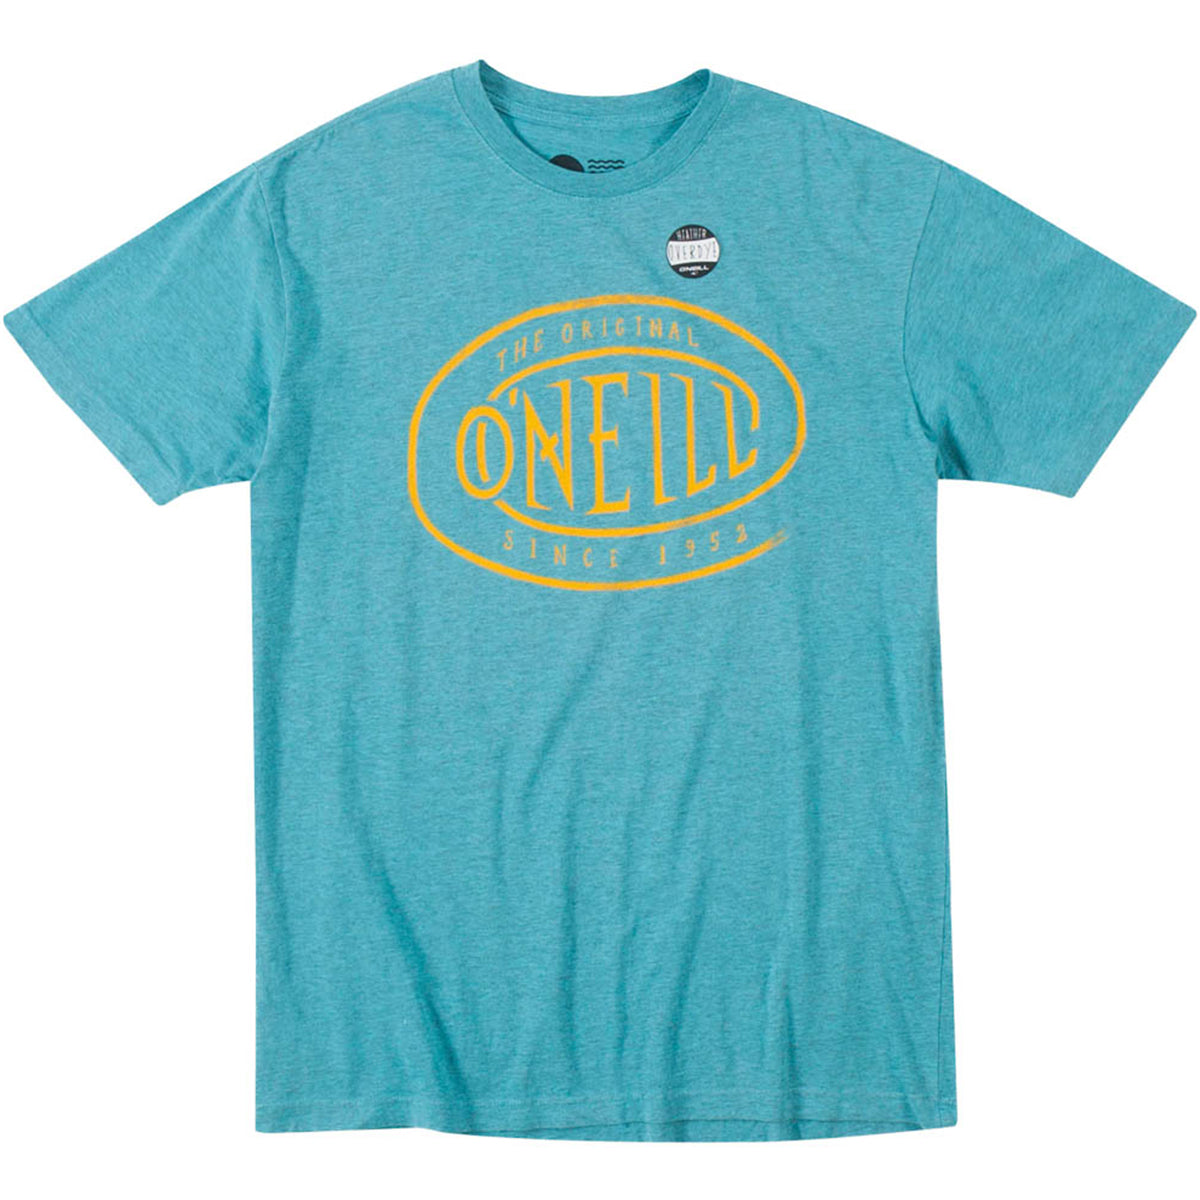 O'Neill Intro Men's Short-Sleeve Shirts - New Teal